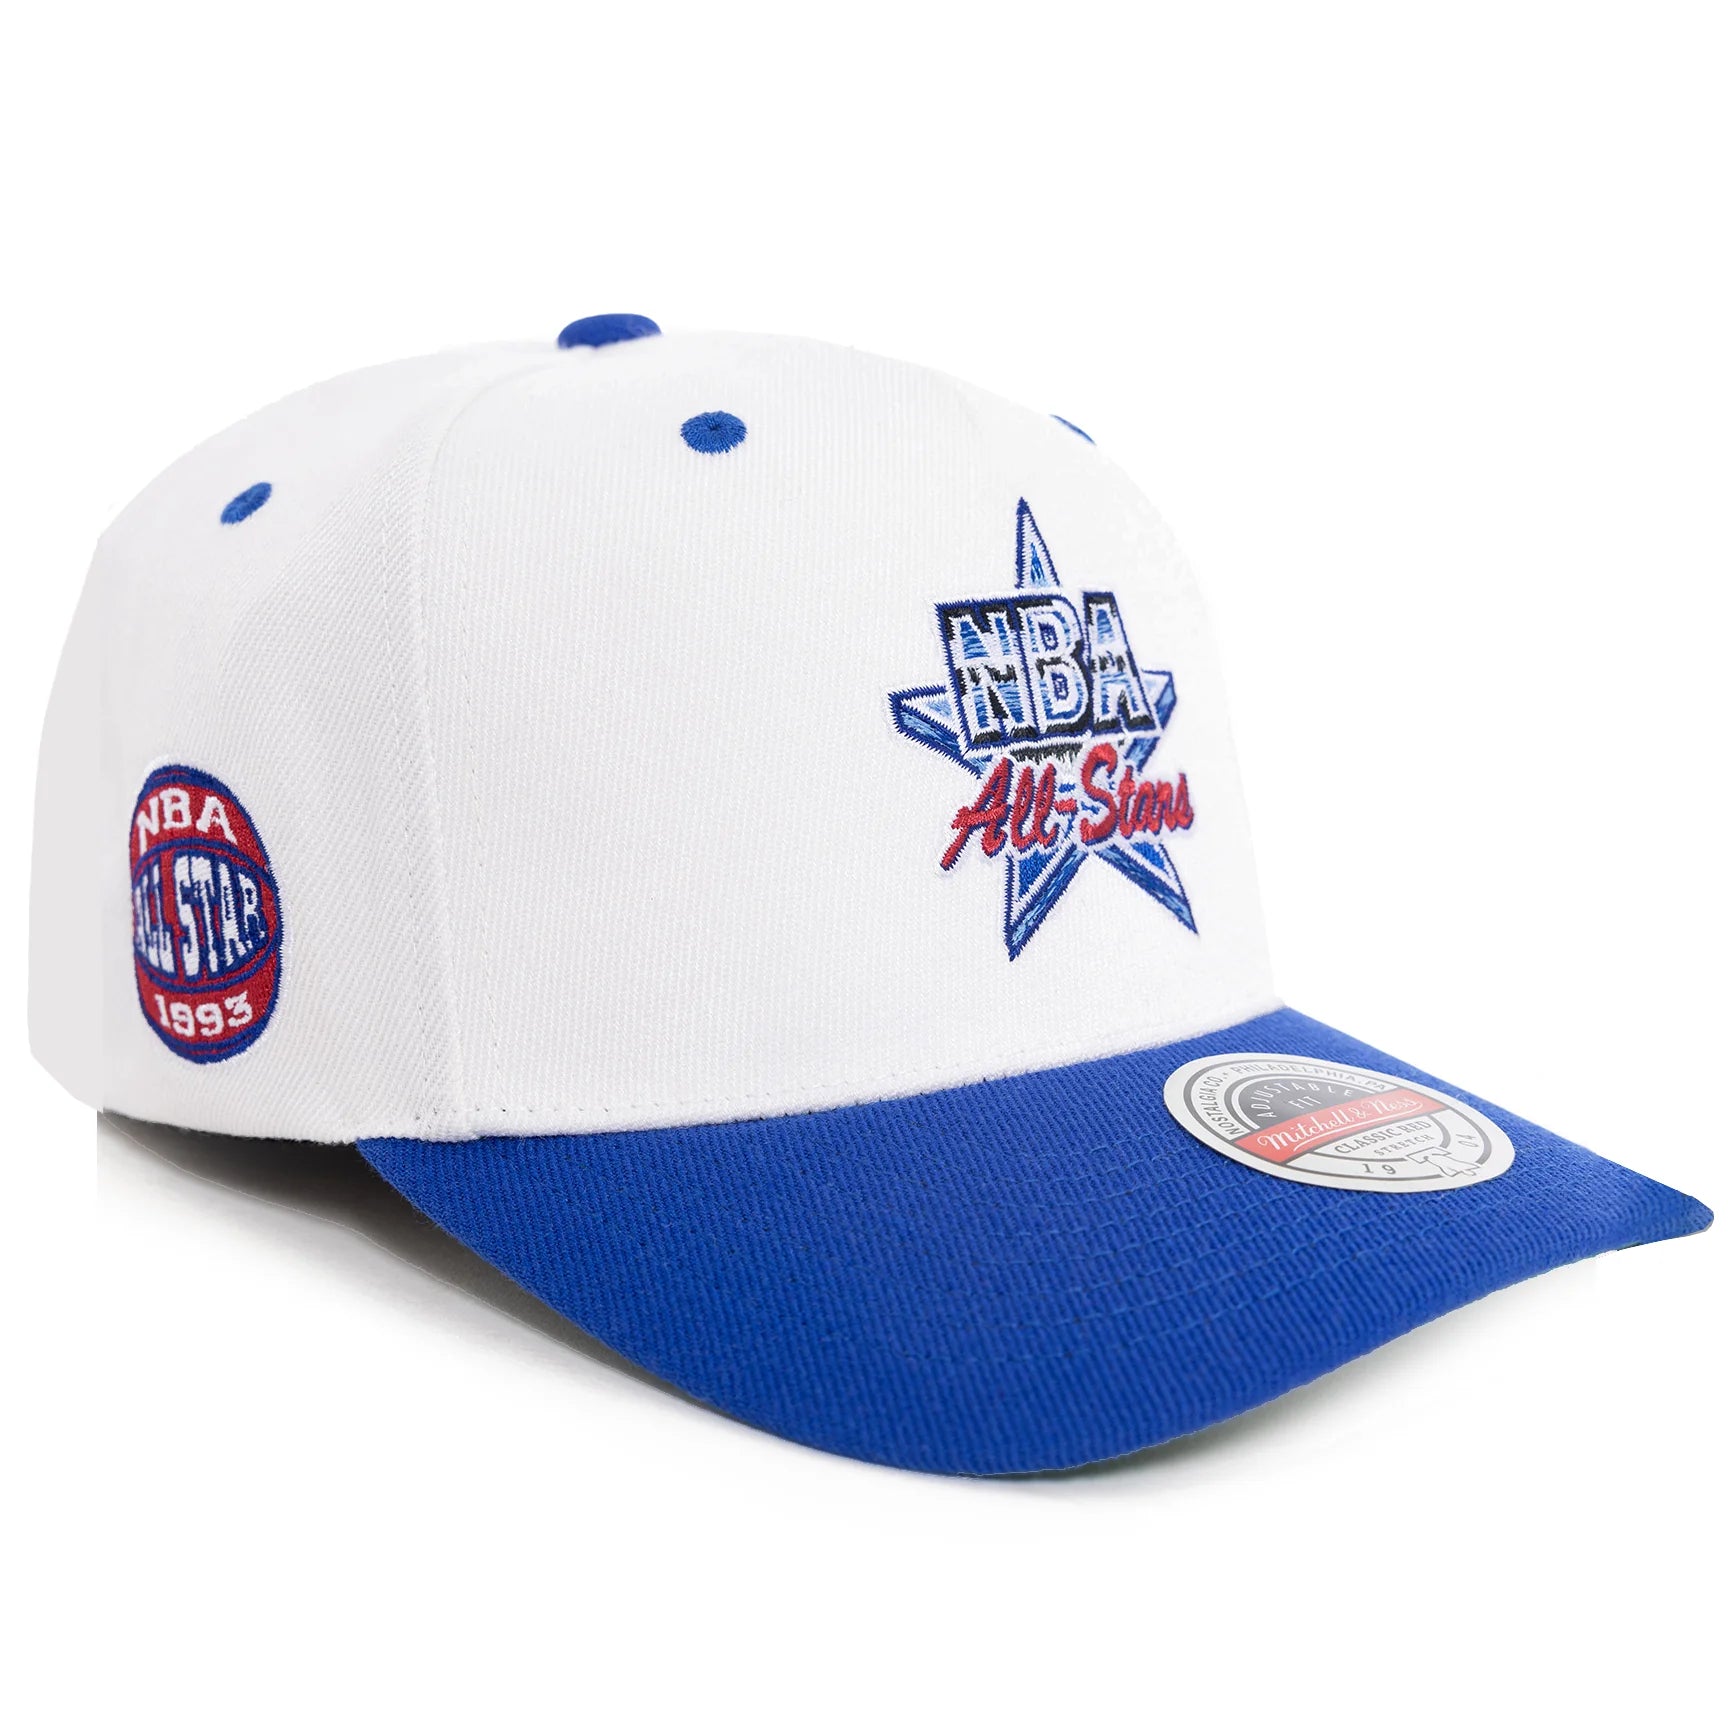 NBA All Stars 1993 Hat - Off White & Navy Classic Red Snapback Cap- Mitchell & Ness